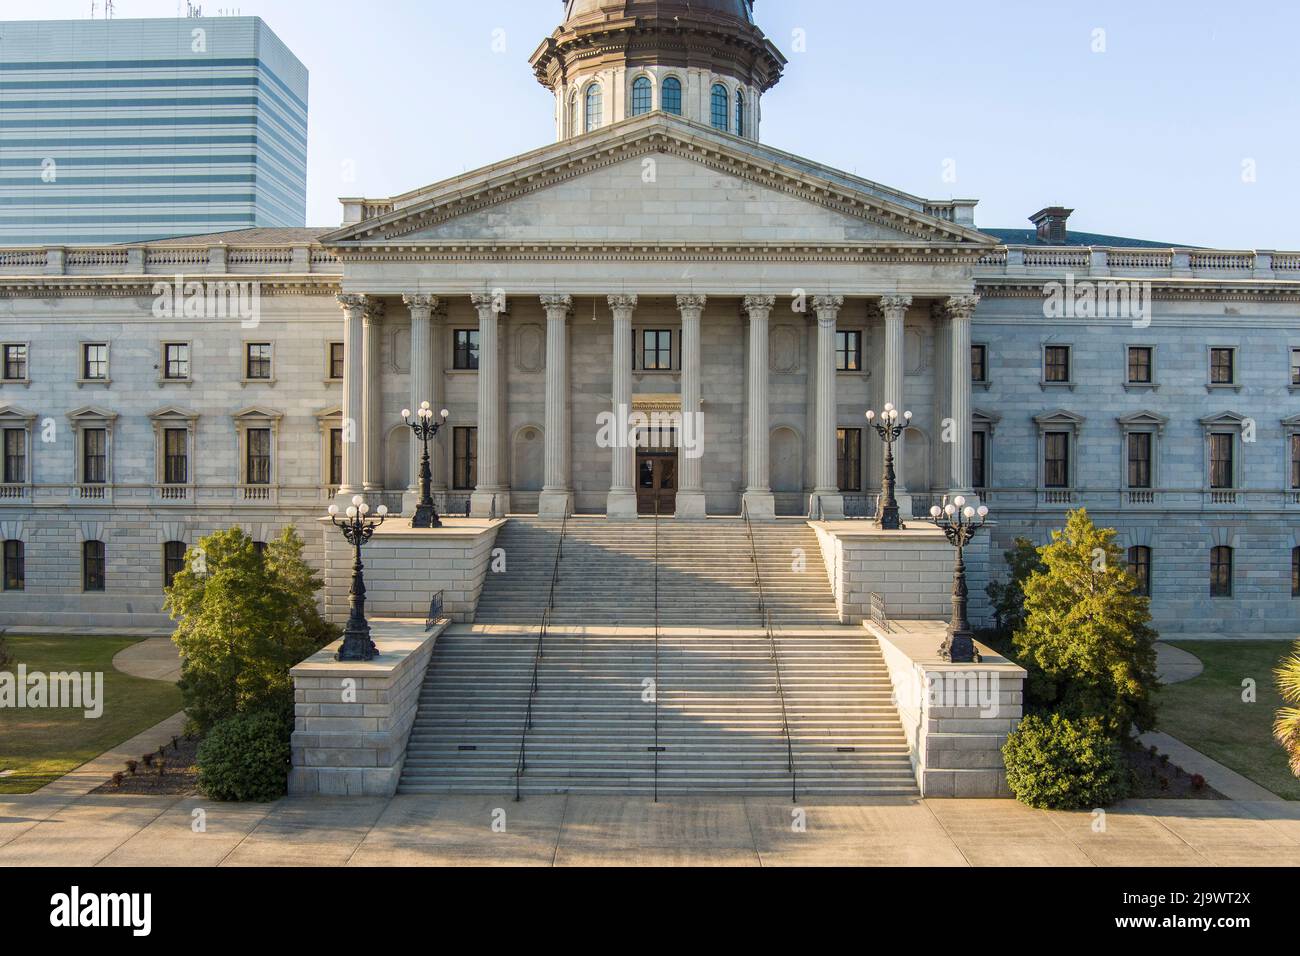 Front view of the South Carolina State House, seat of government in South Carolina. Stock Photo